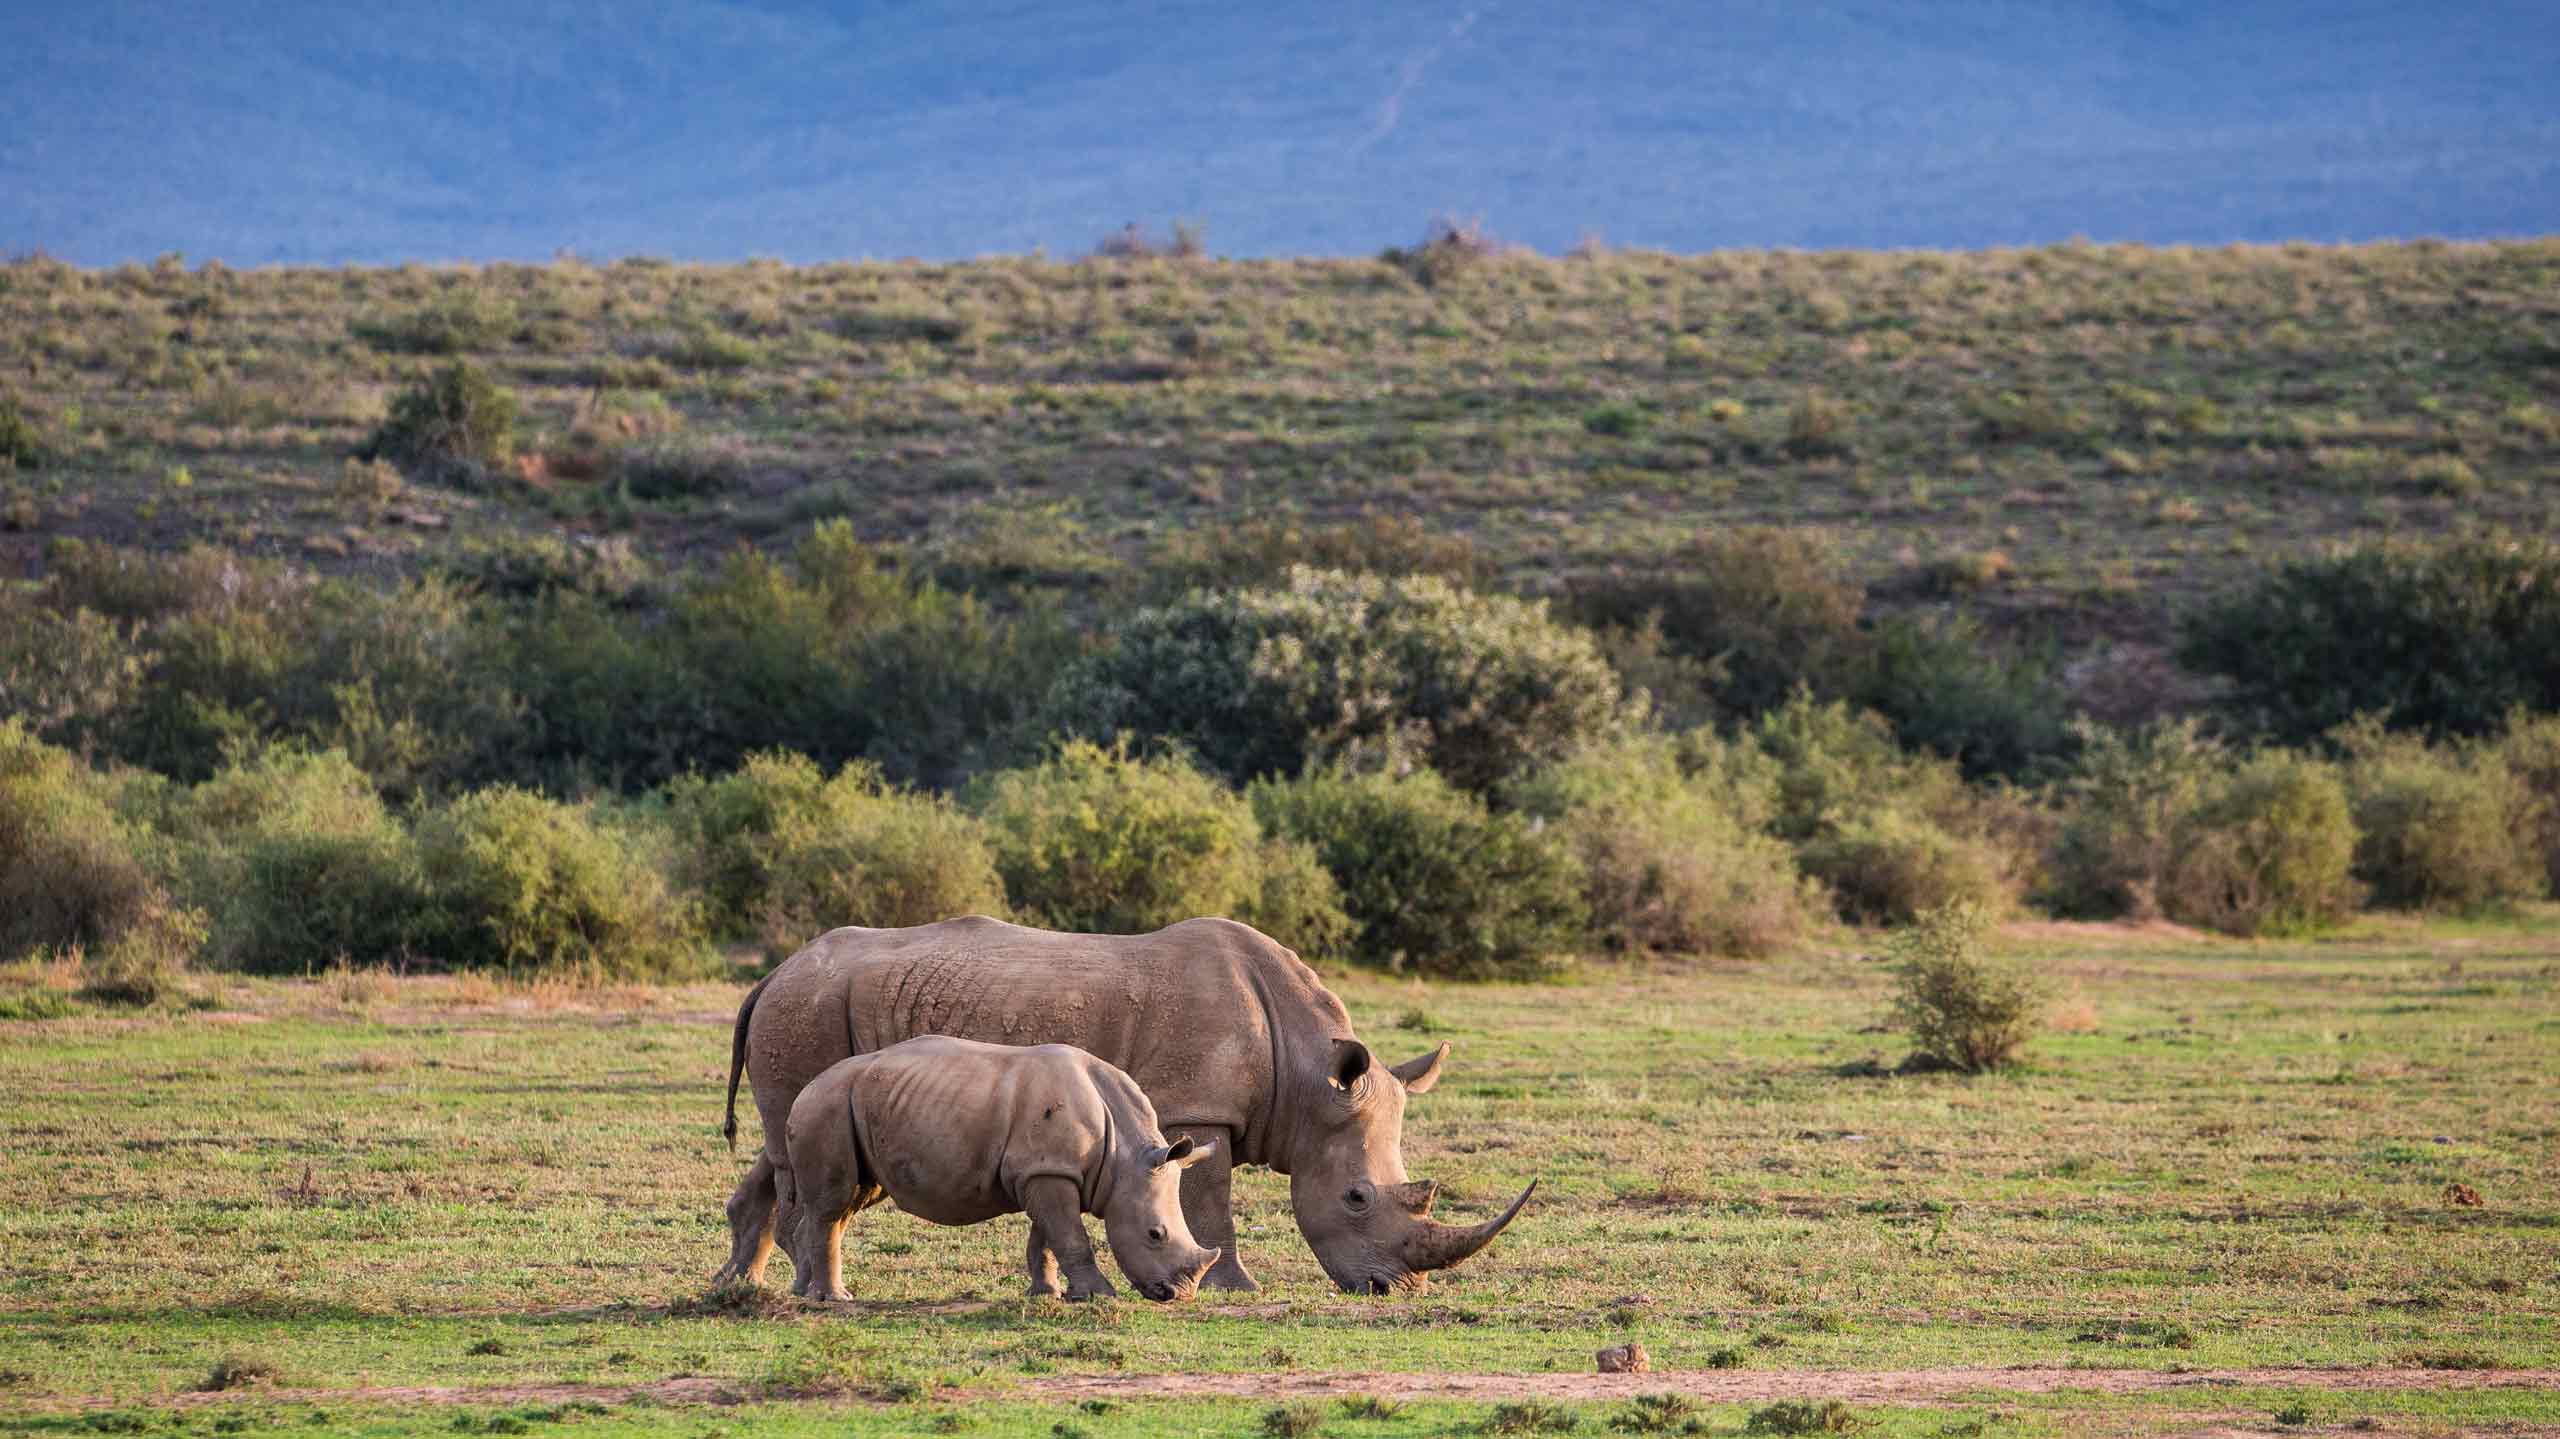 Rhino grazing in Kwande Private Game Reserve in South Africa